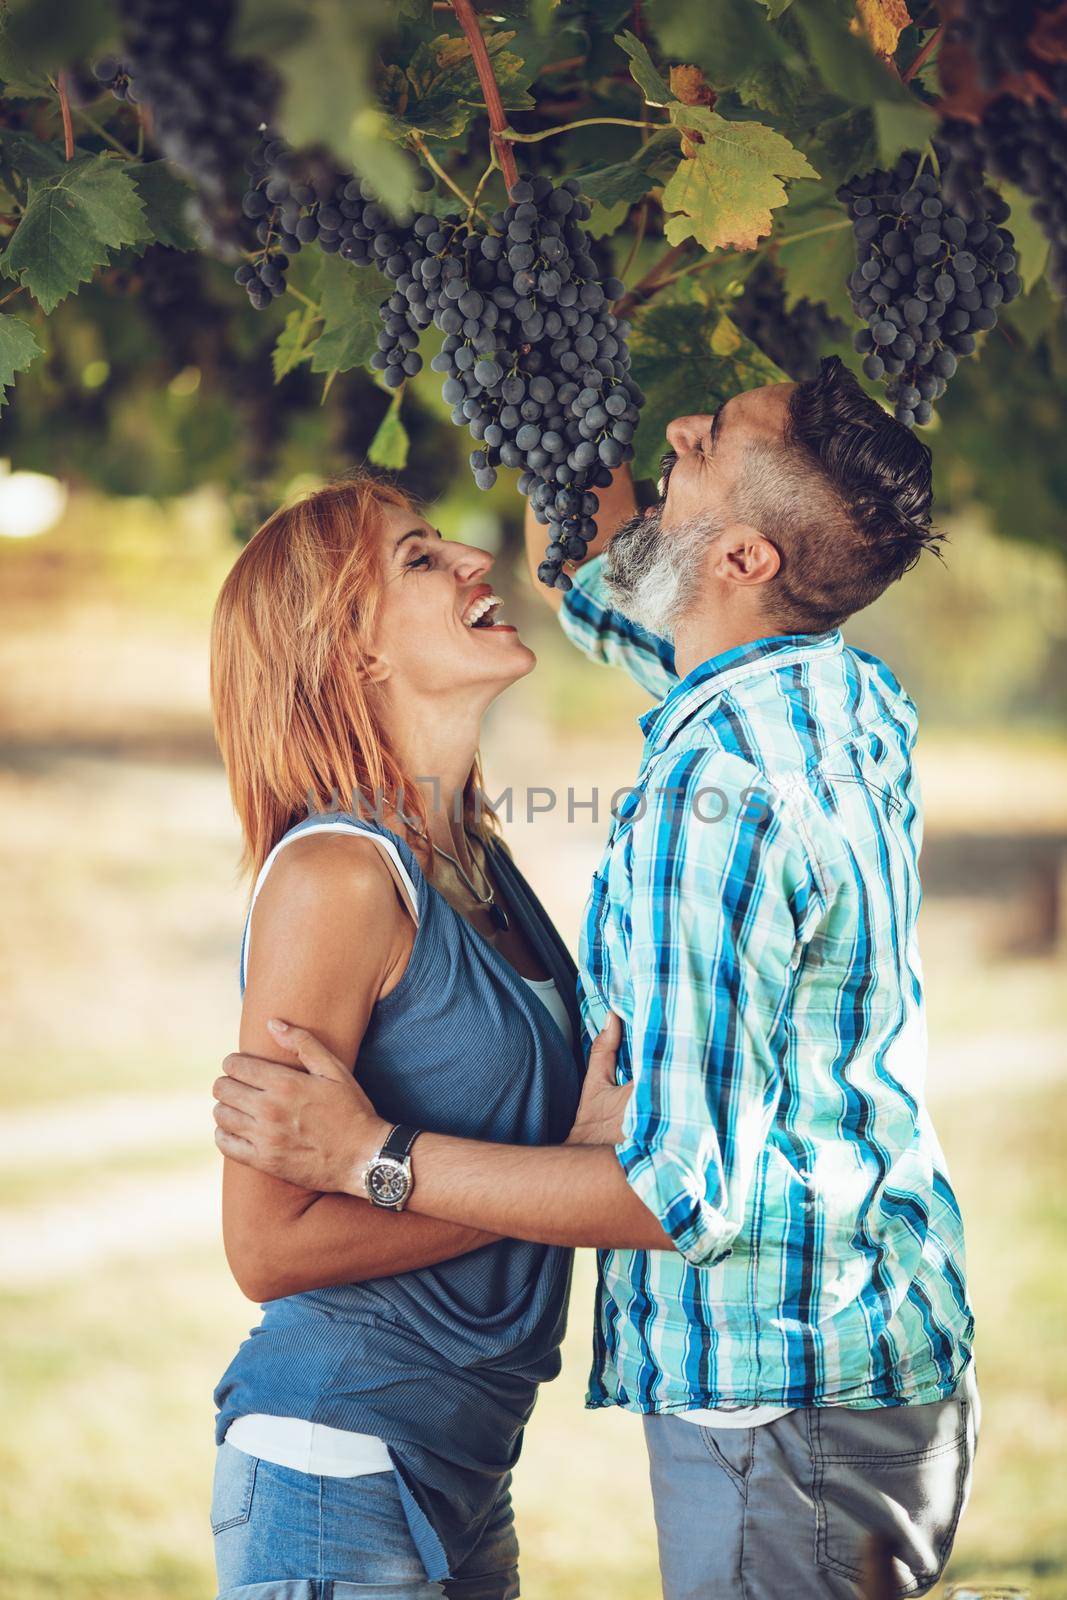 Couple In The Vineyard by MilanMarkovic78